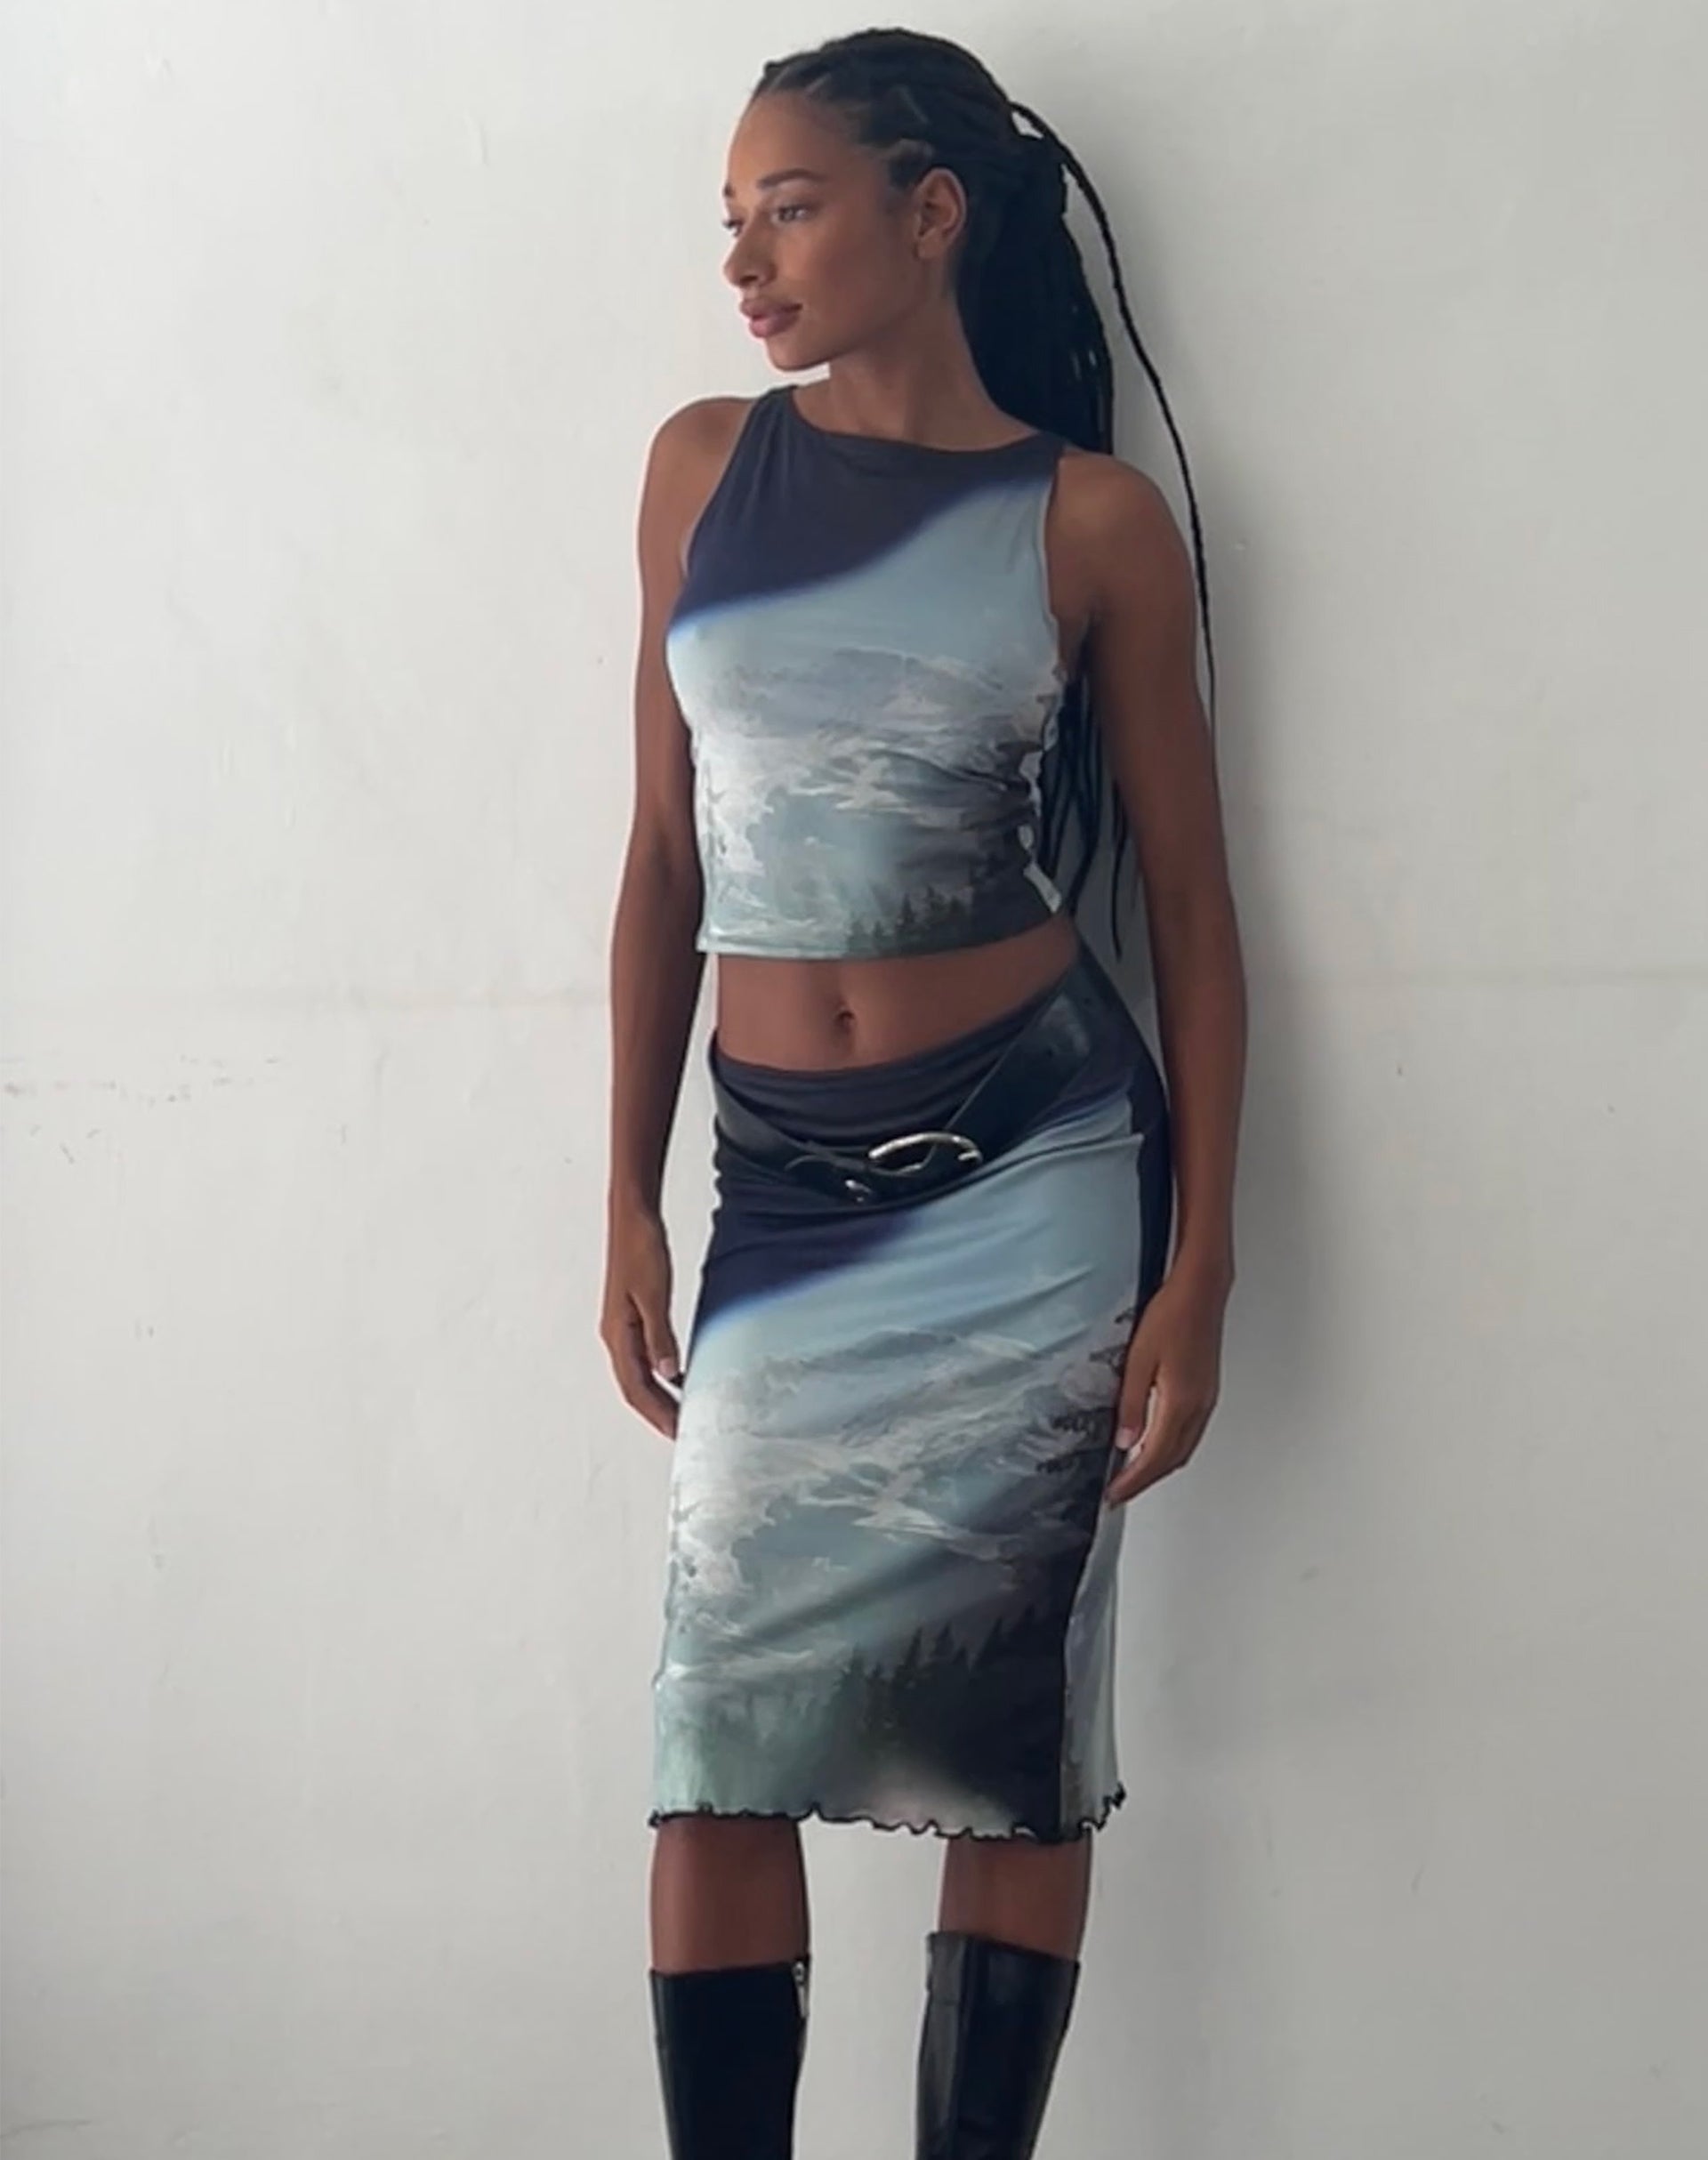 Image of Rambi Vest Crop Top in Abstract Landscape Collage